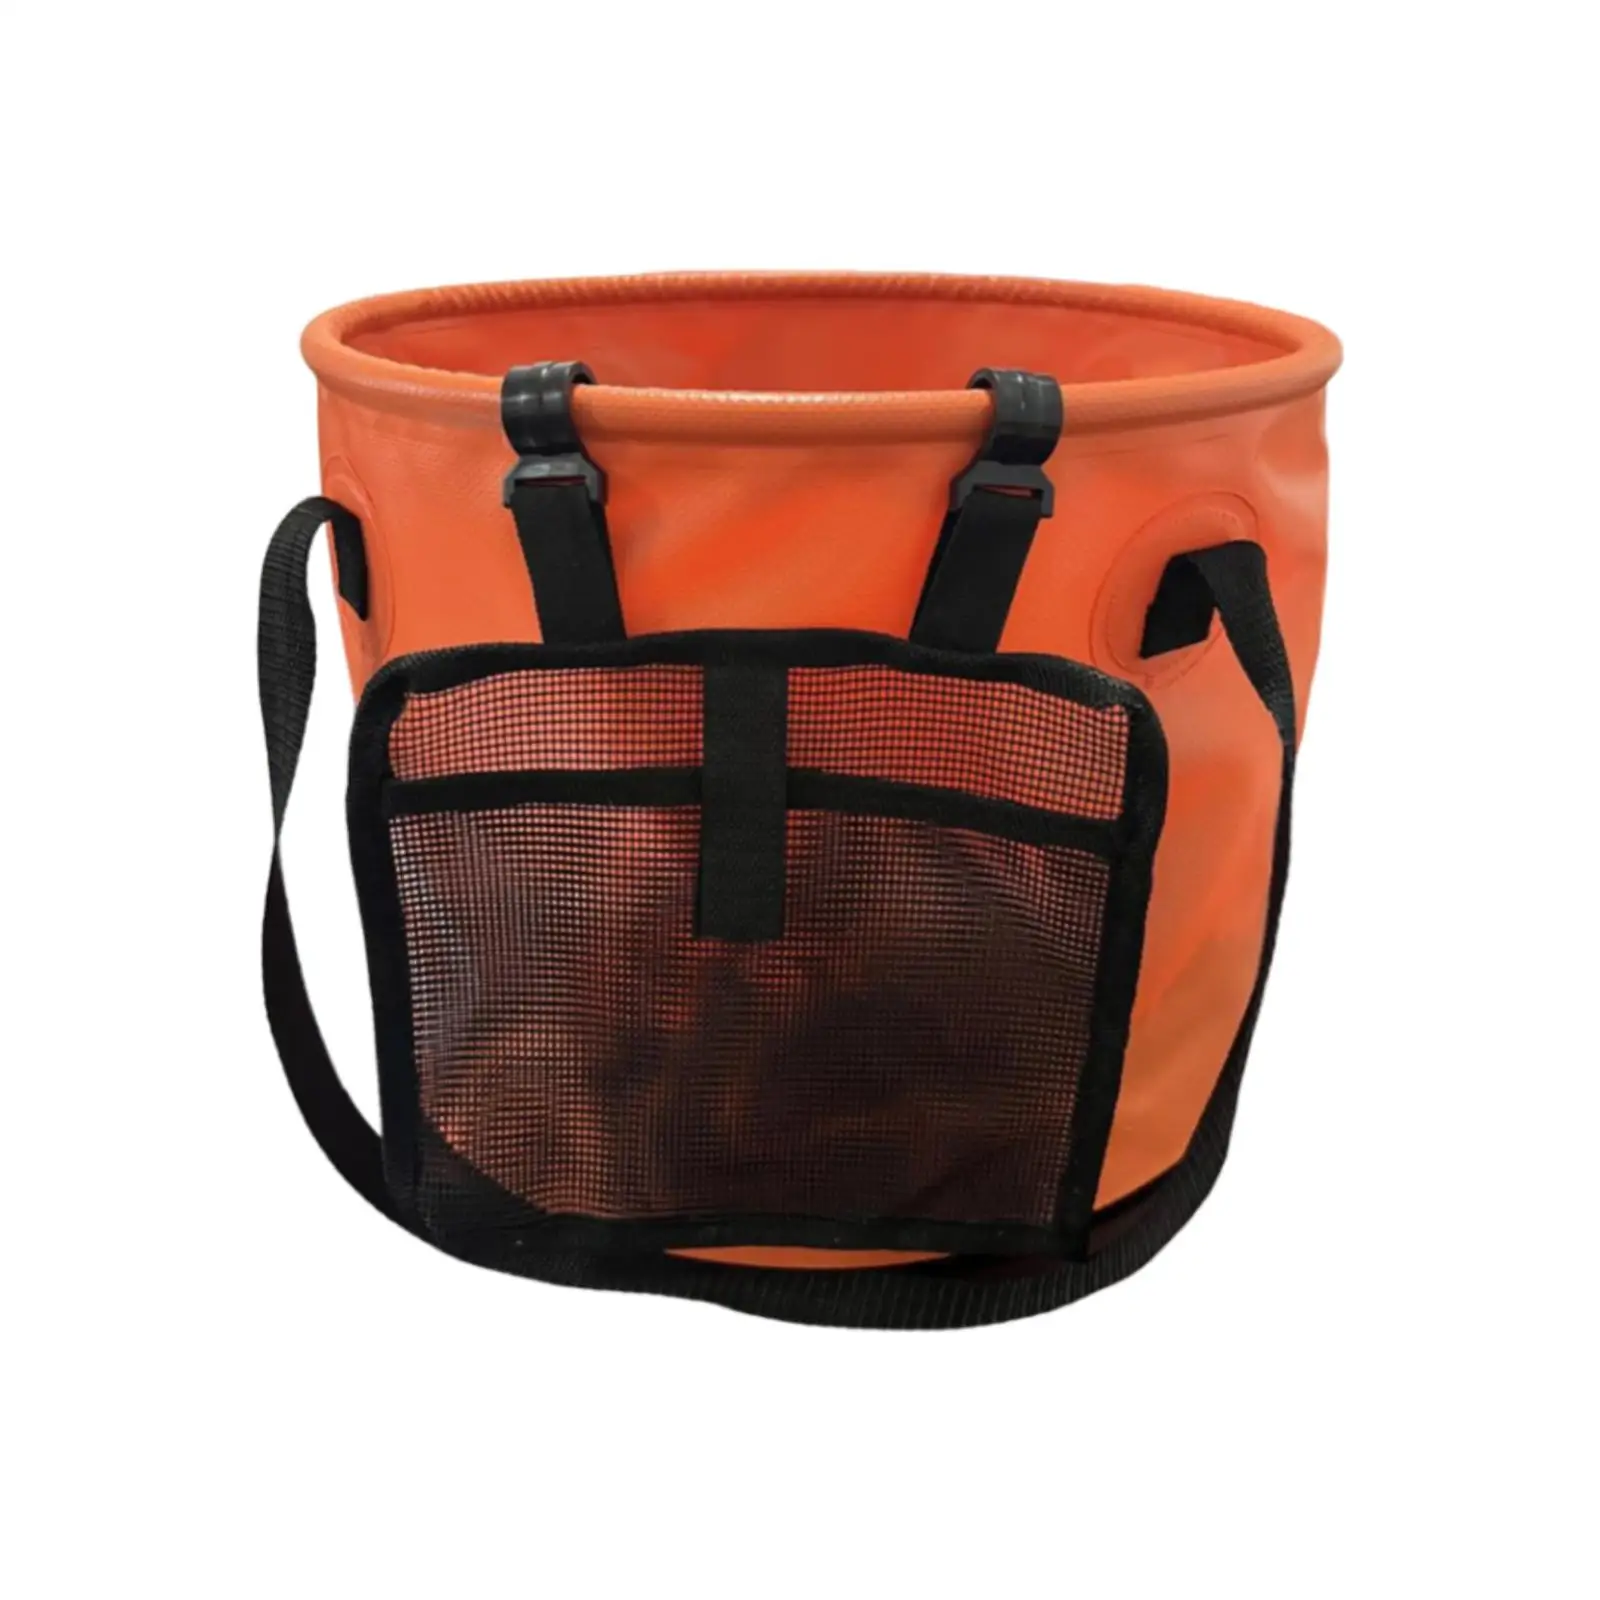 Collapsible Bucket Basin Pail 6 Gallon Water Container Foldable Water Bucket for Travelling Hiking Pool Washing Gardening